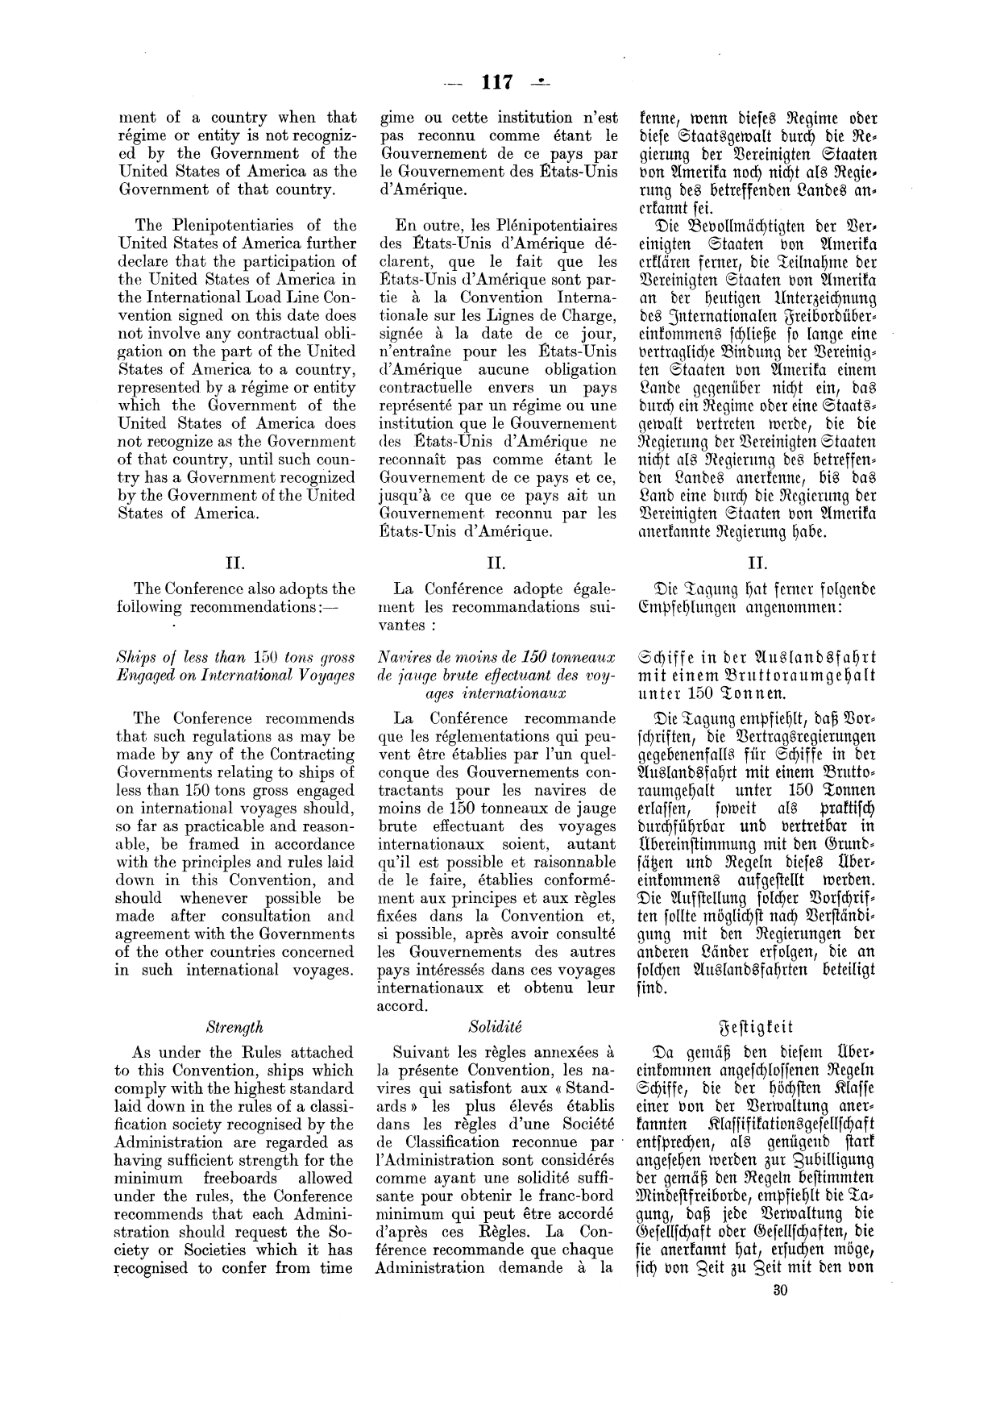 Scan of page 117